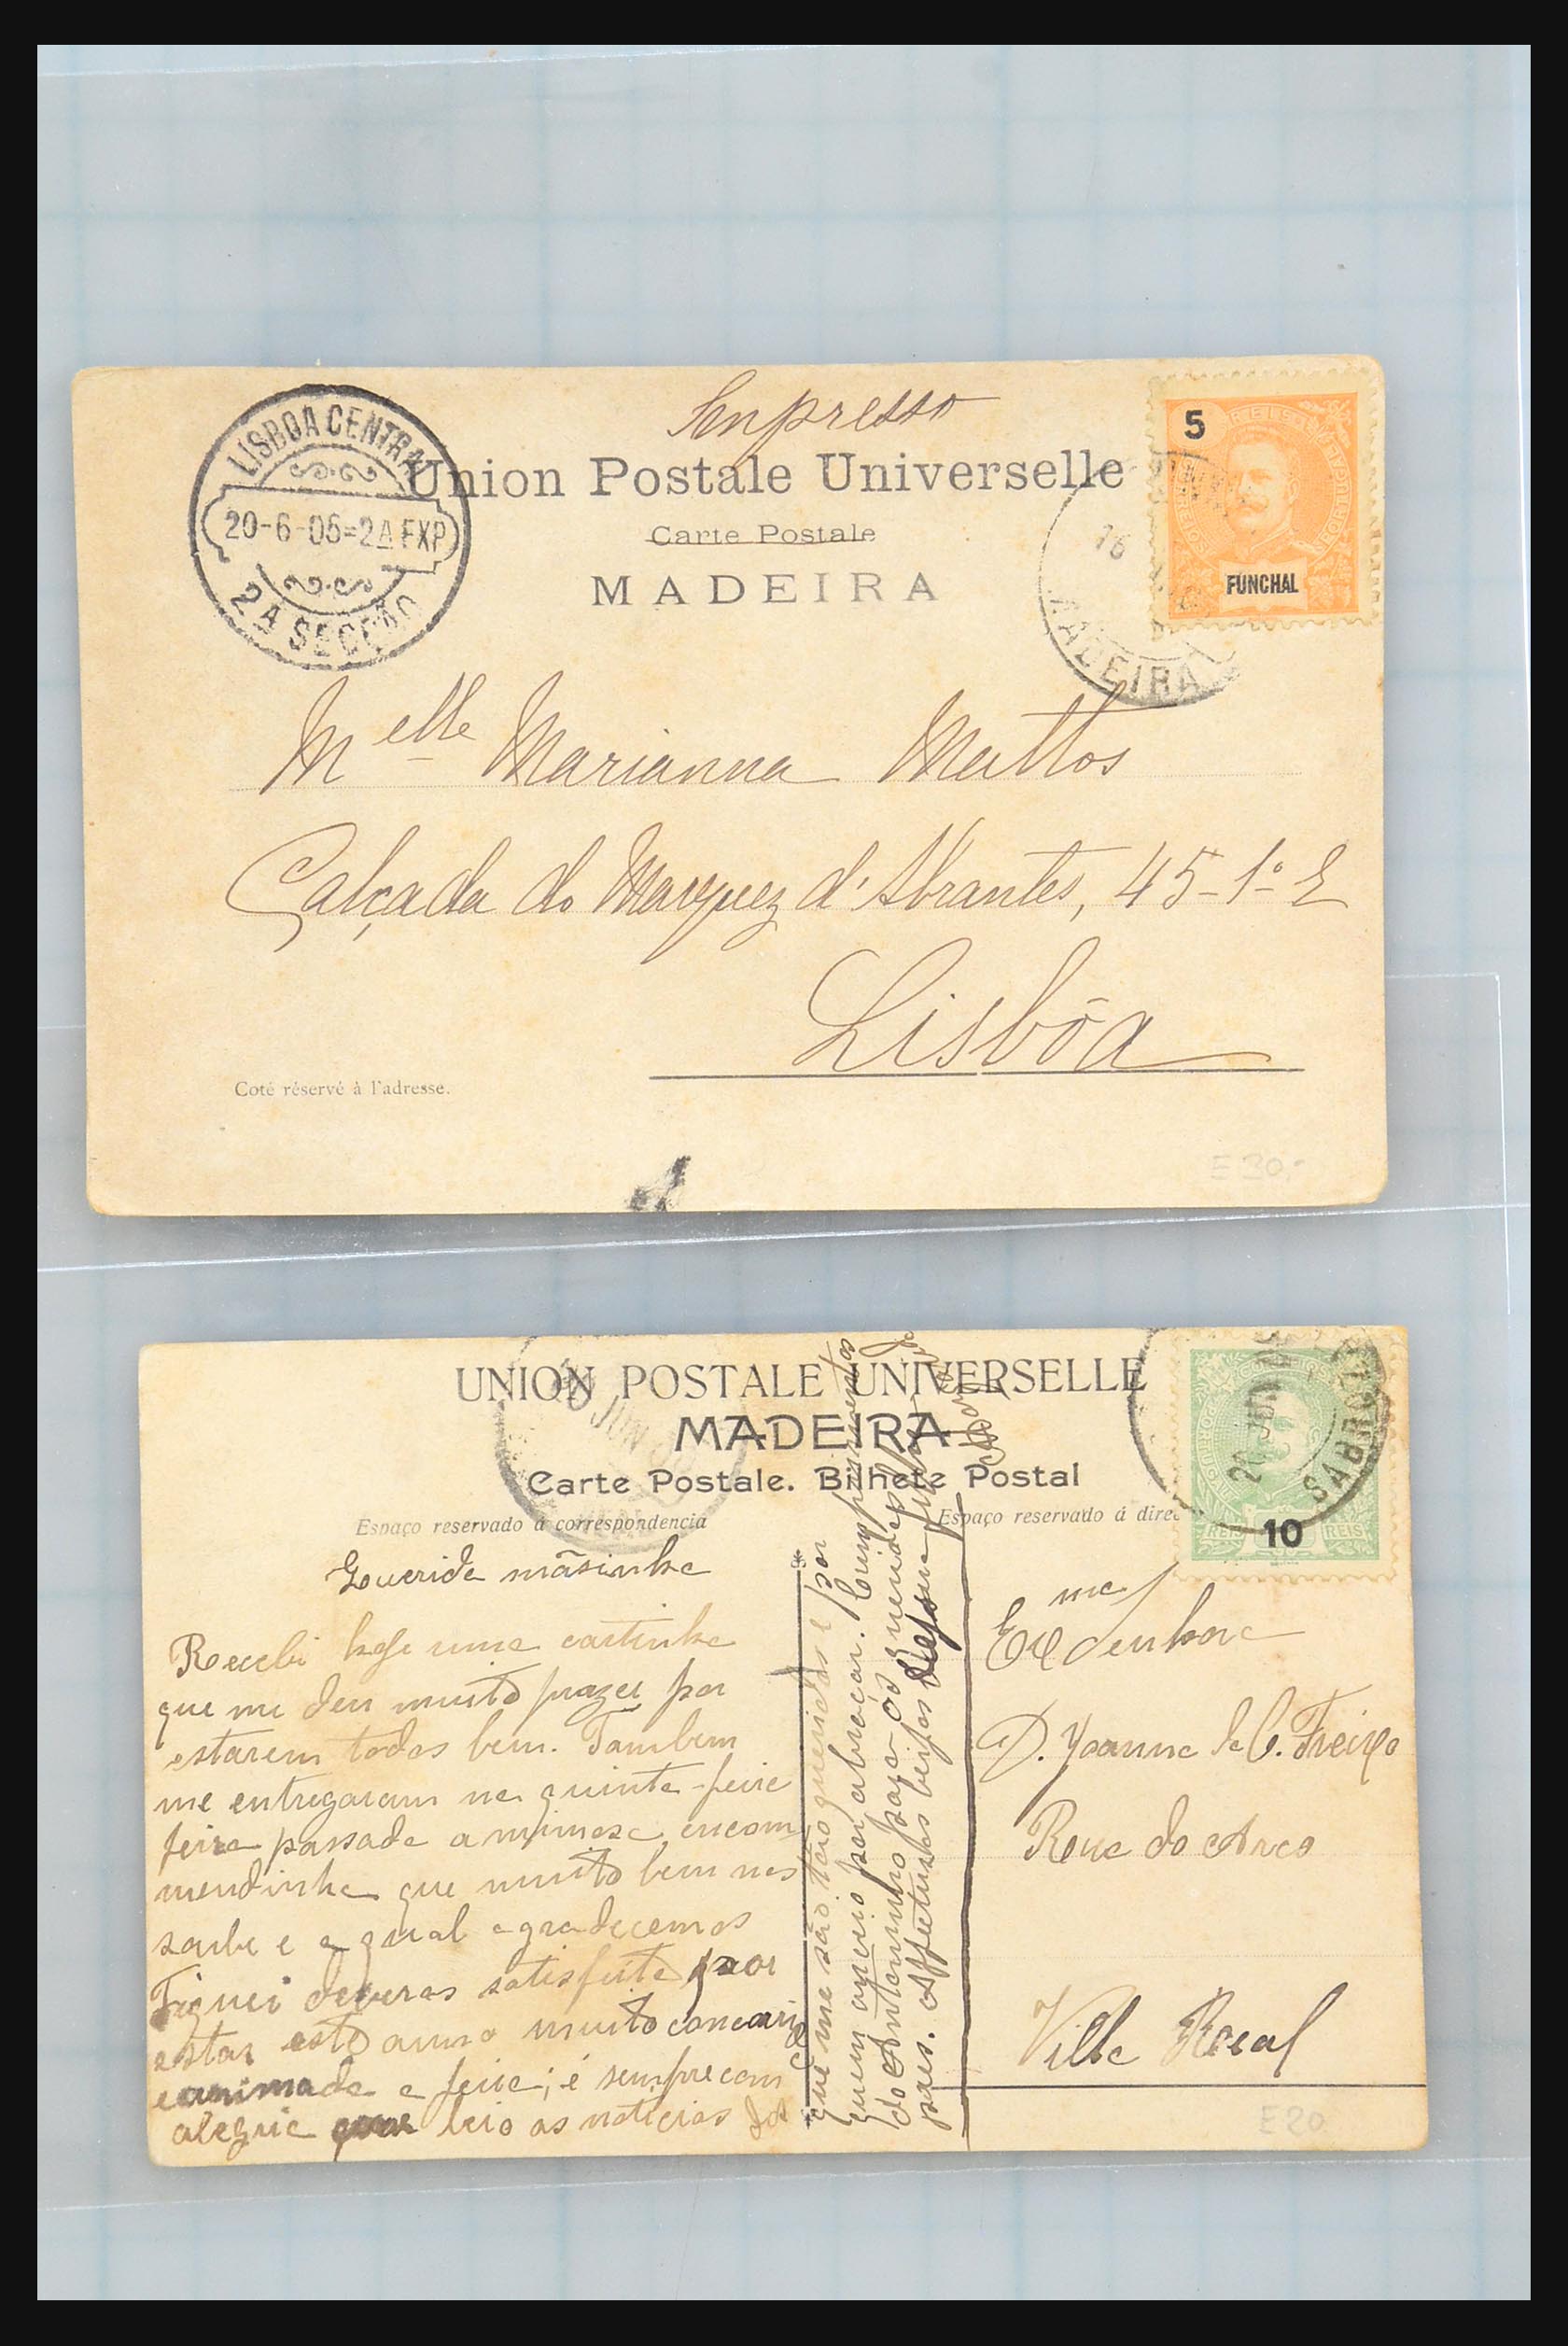 31358 244 - 31358 Portugal/Luxemburg/Greece covers 1880-1960.